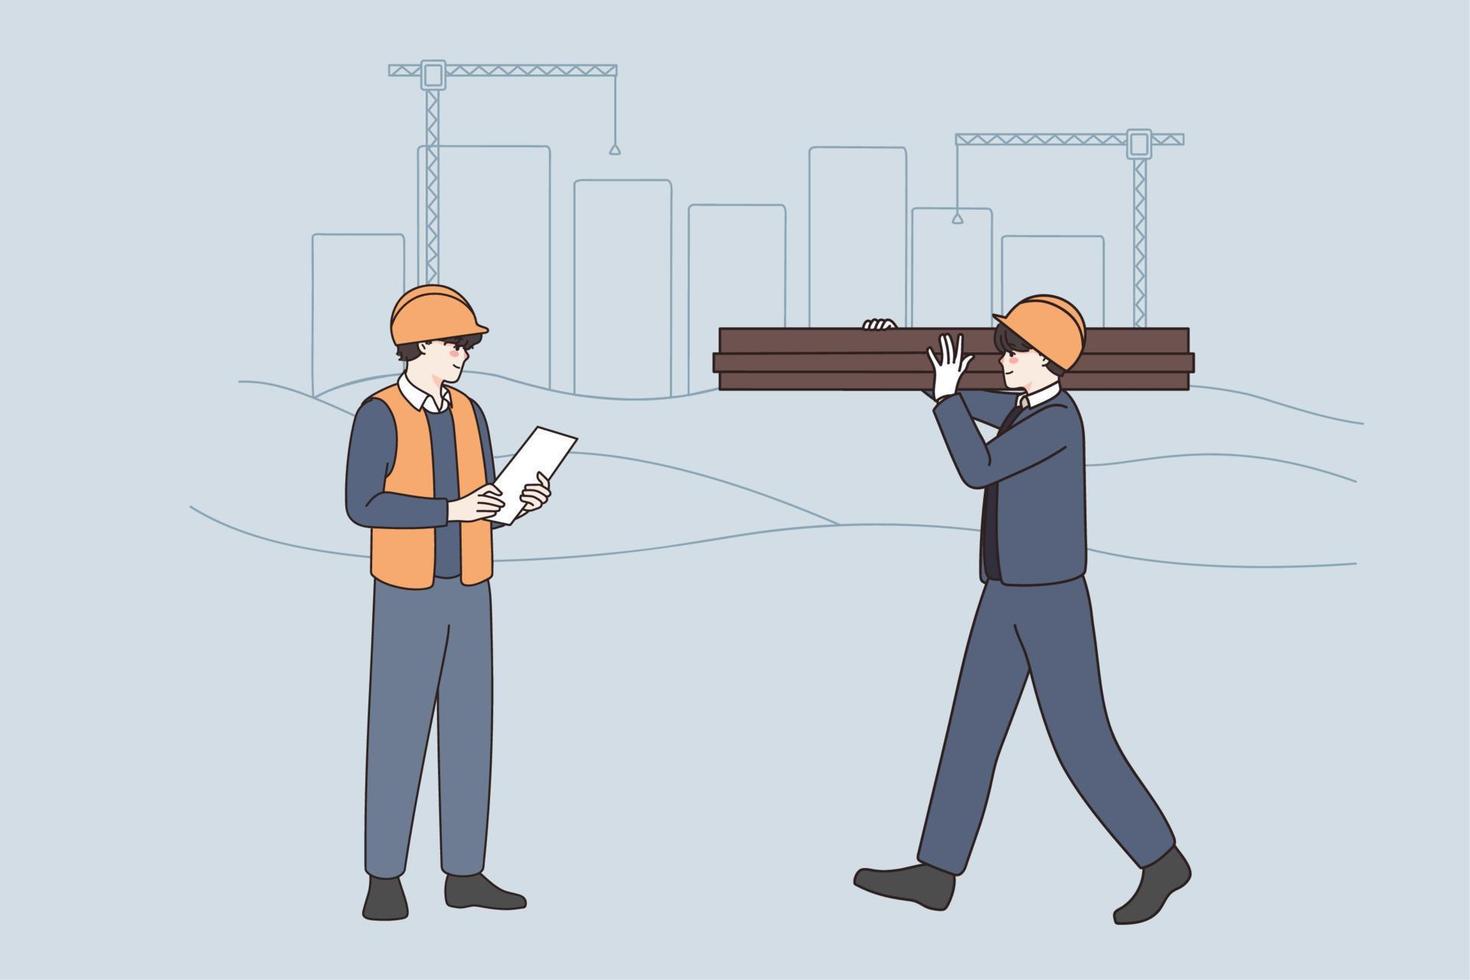 Construction industry and workers concept. Young smiling workers builders in helmets and uniform standing managing and carrying materials vector illustration